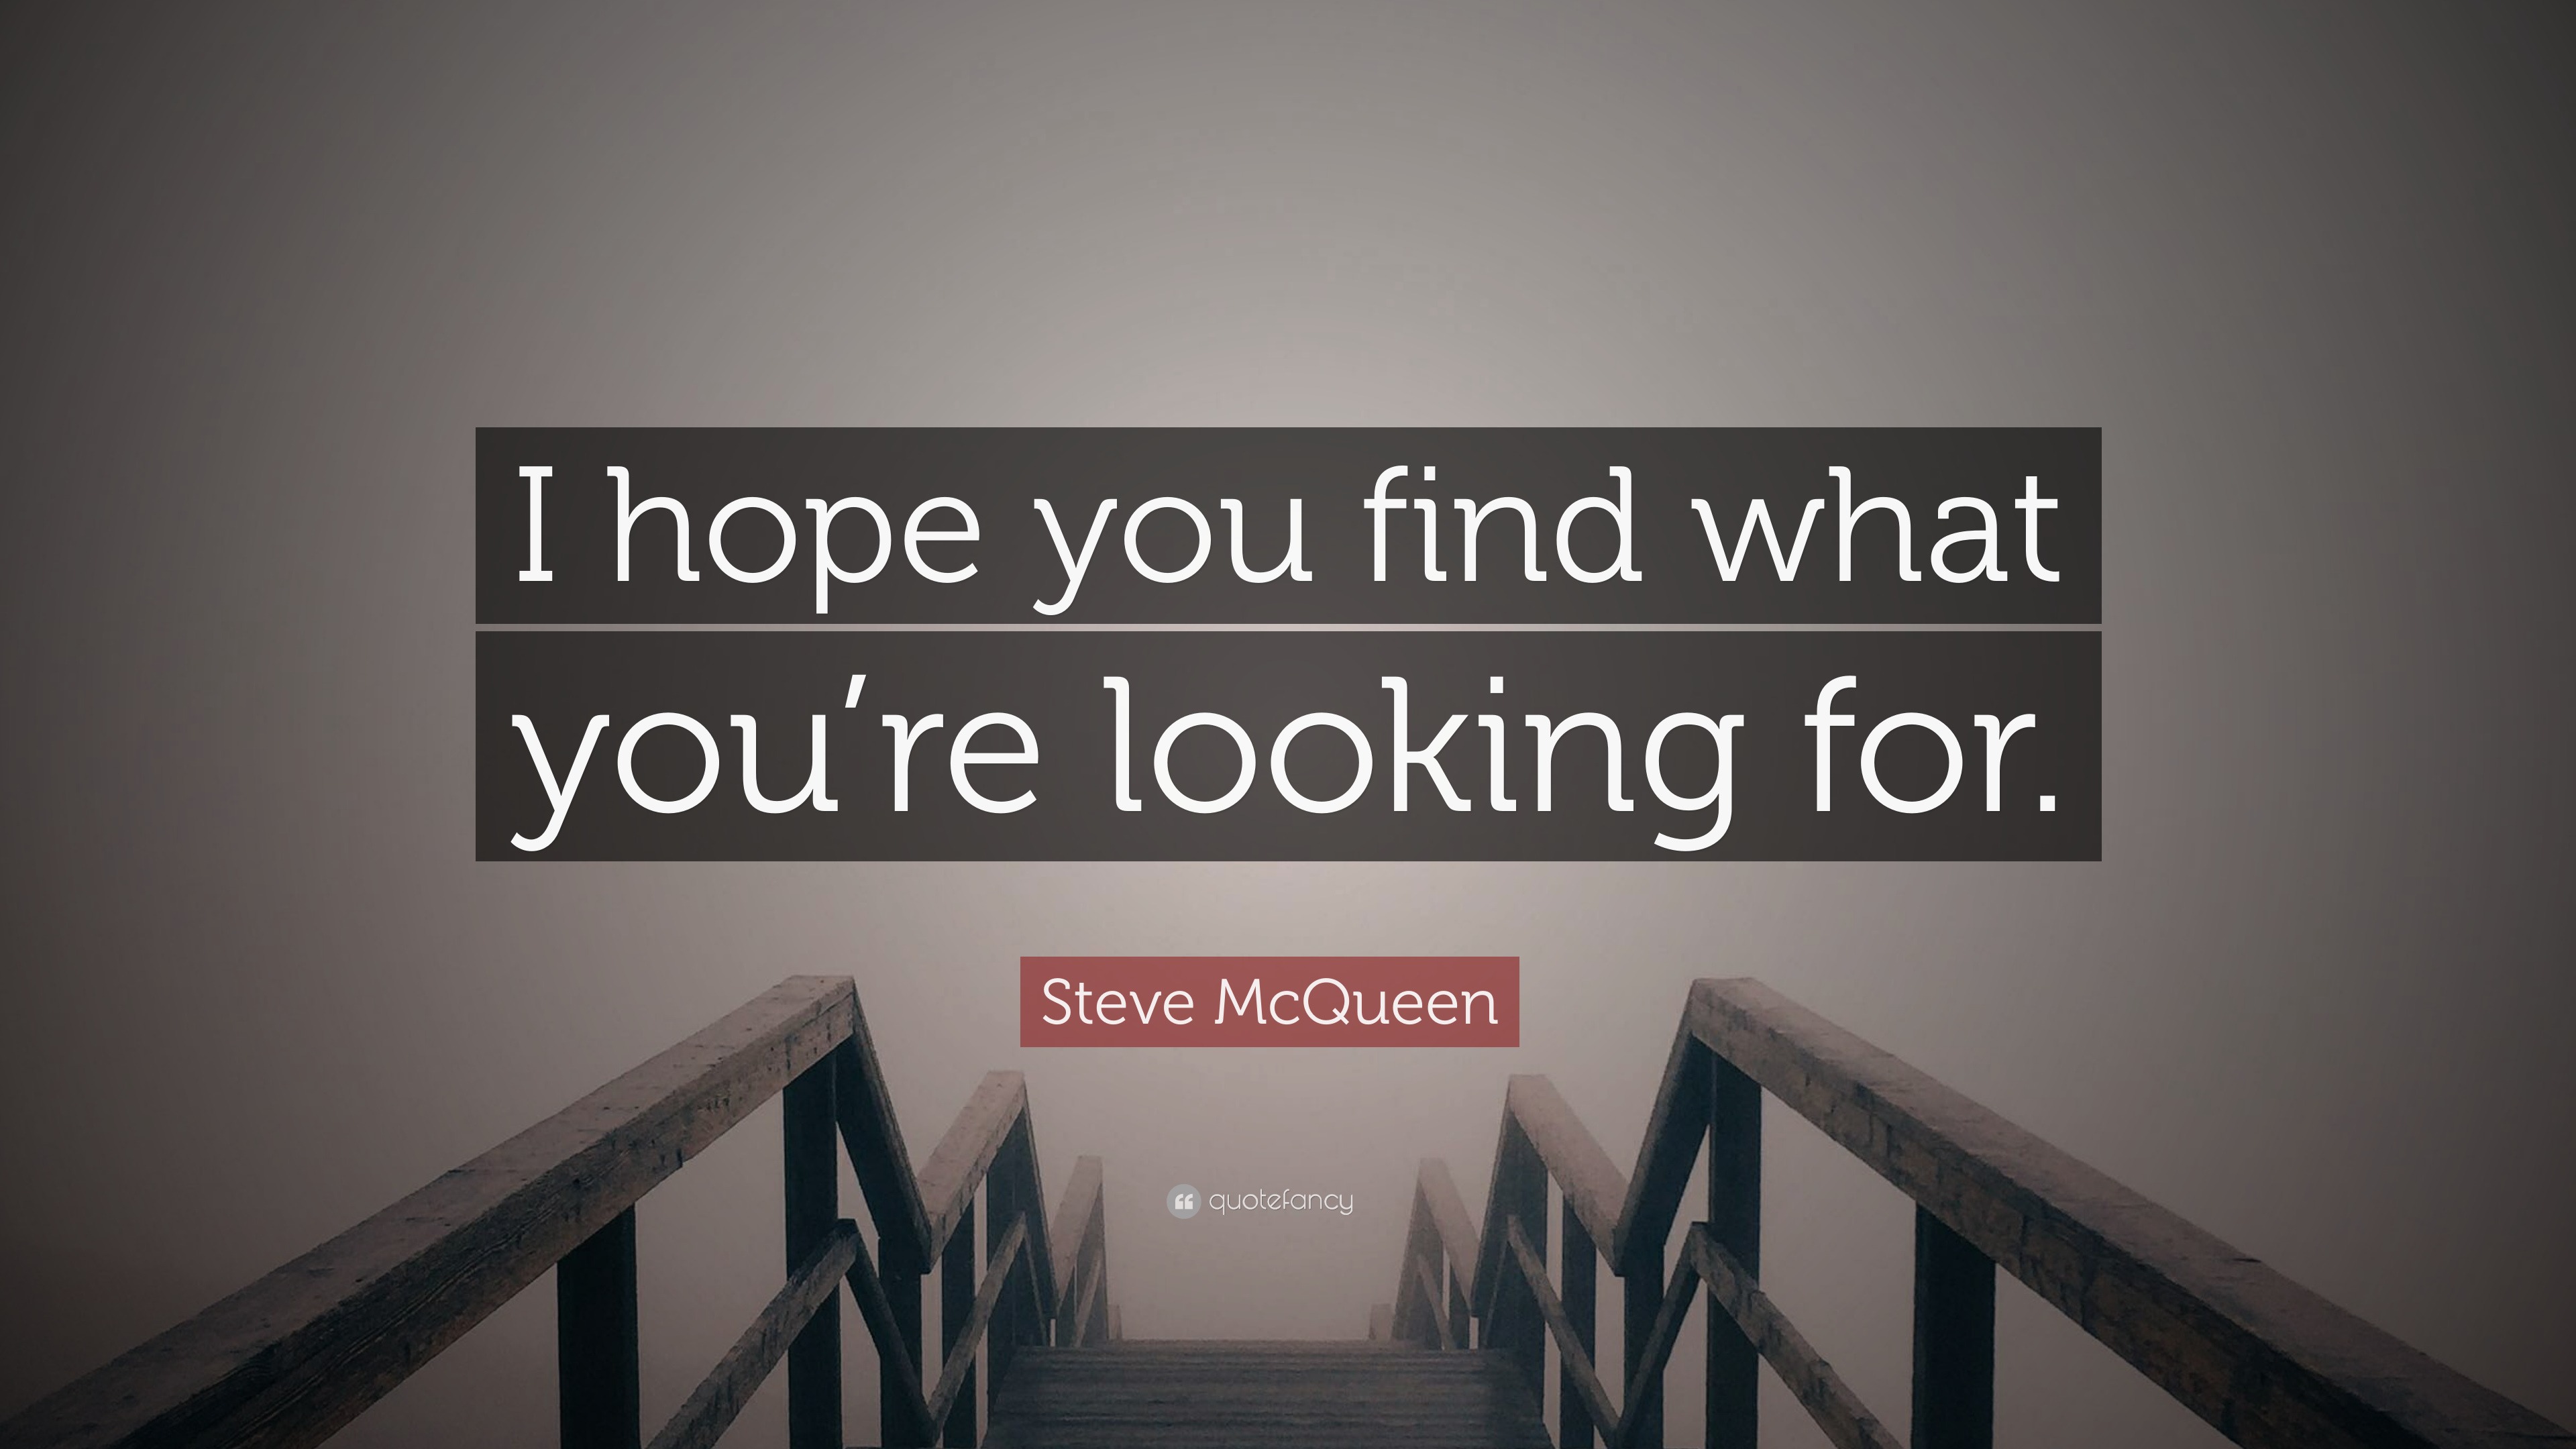 Steve Mcqueen Quote: “I Hope You Find What You're Looking For.”